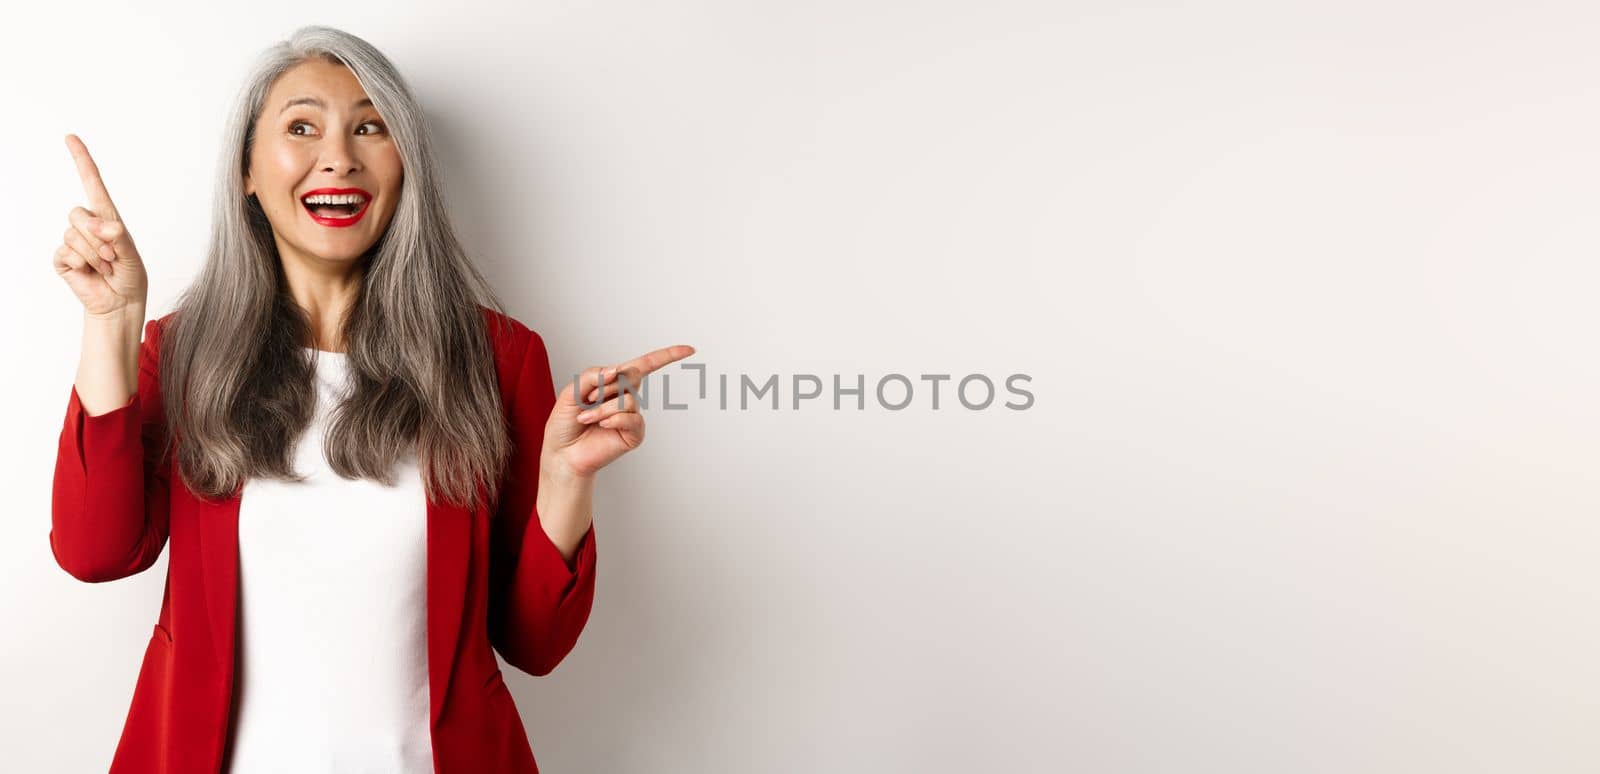 Cheerful asian lady smiling, pointing fingers sideways at two promo offers, standing happy in red blazer over white background.